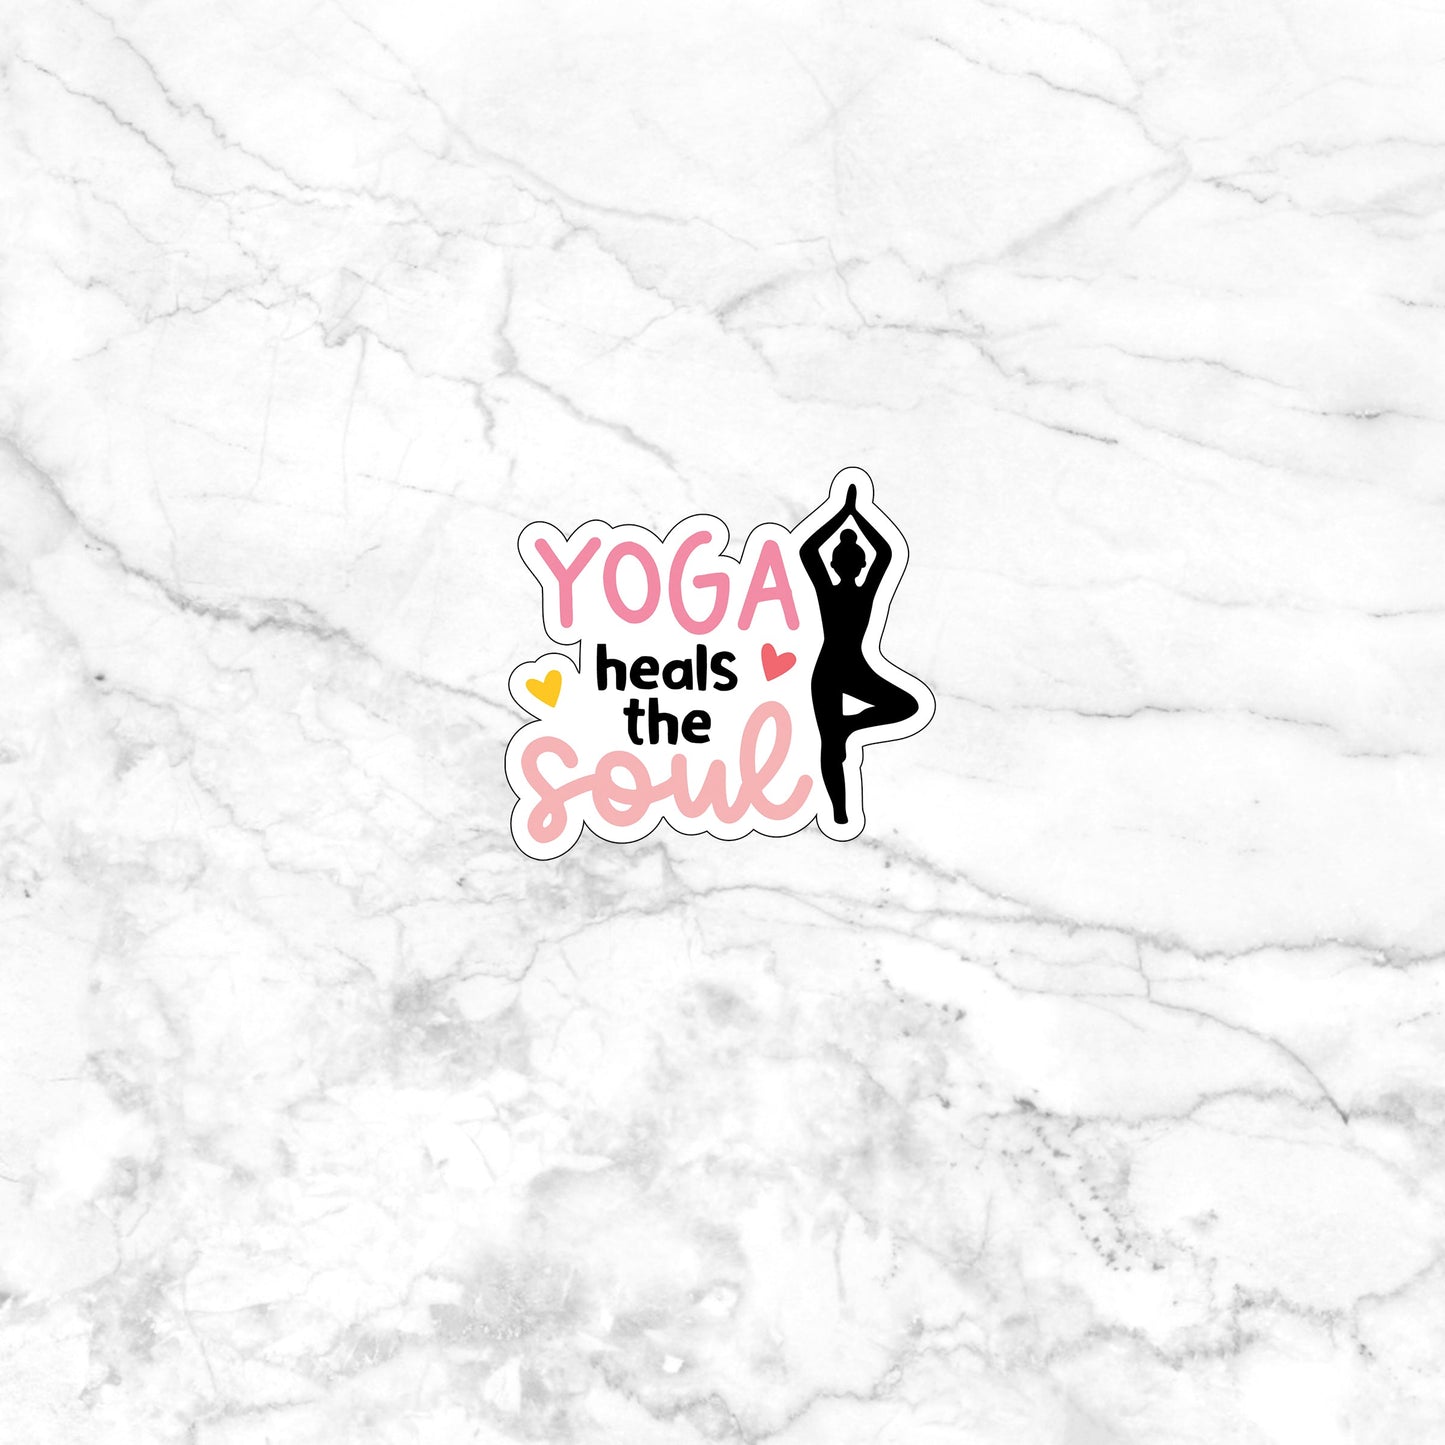 Yoga Sticker, Express Yourself with our Unique Vinyl Stickers for Laptops, Tablets, and More!